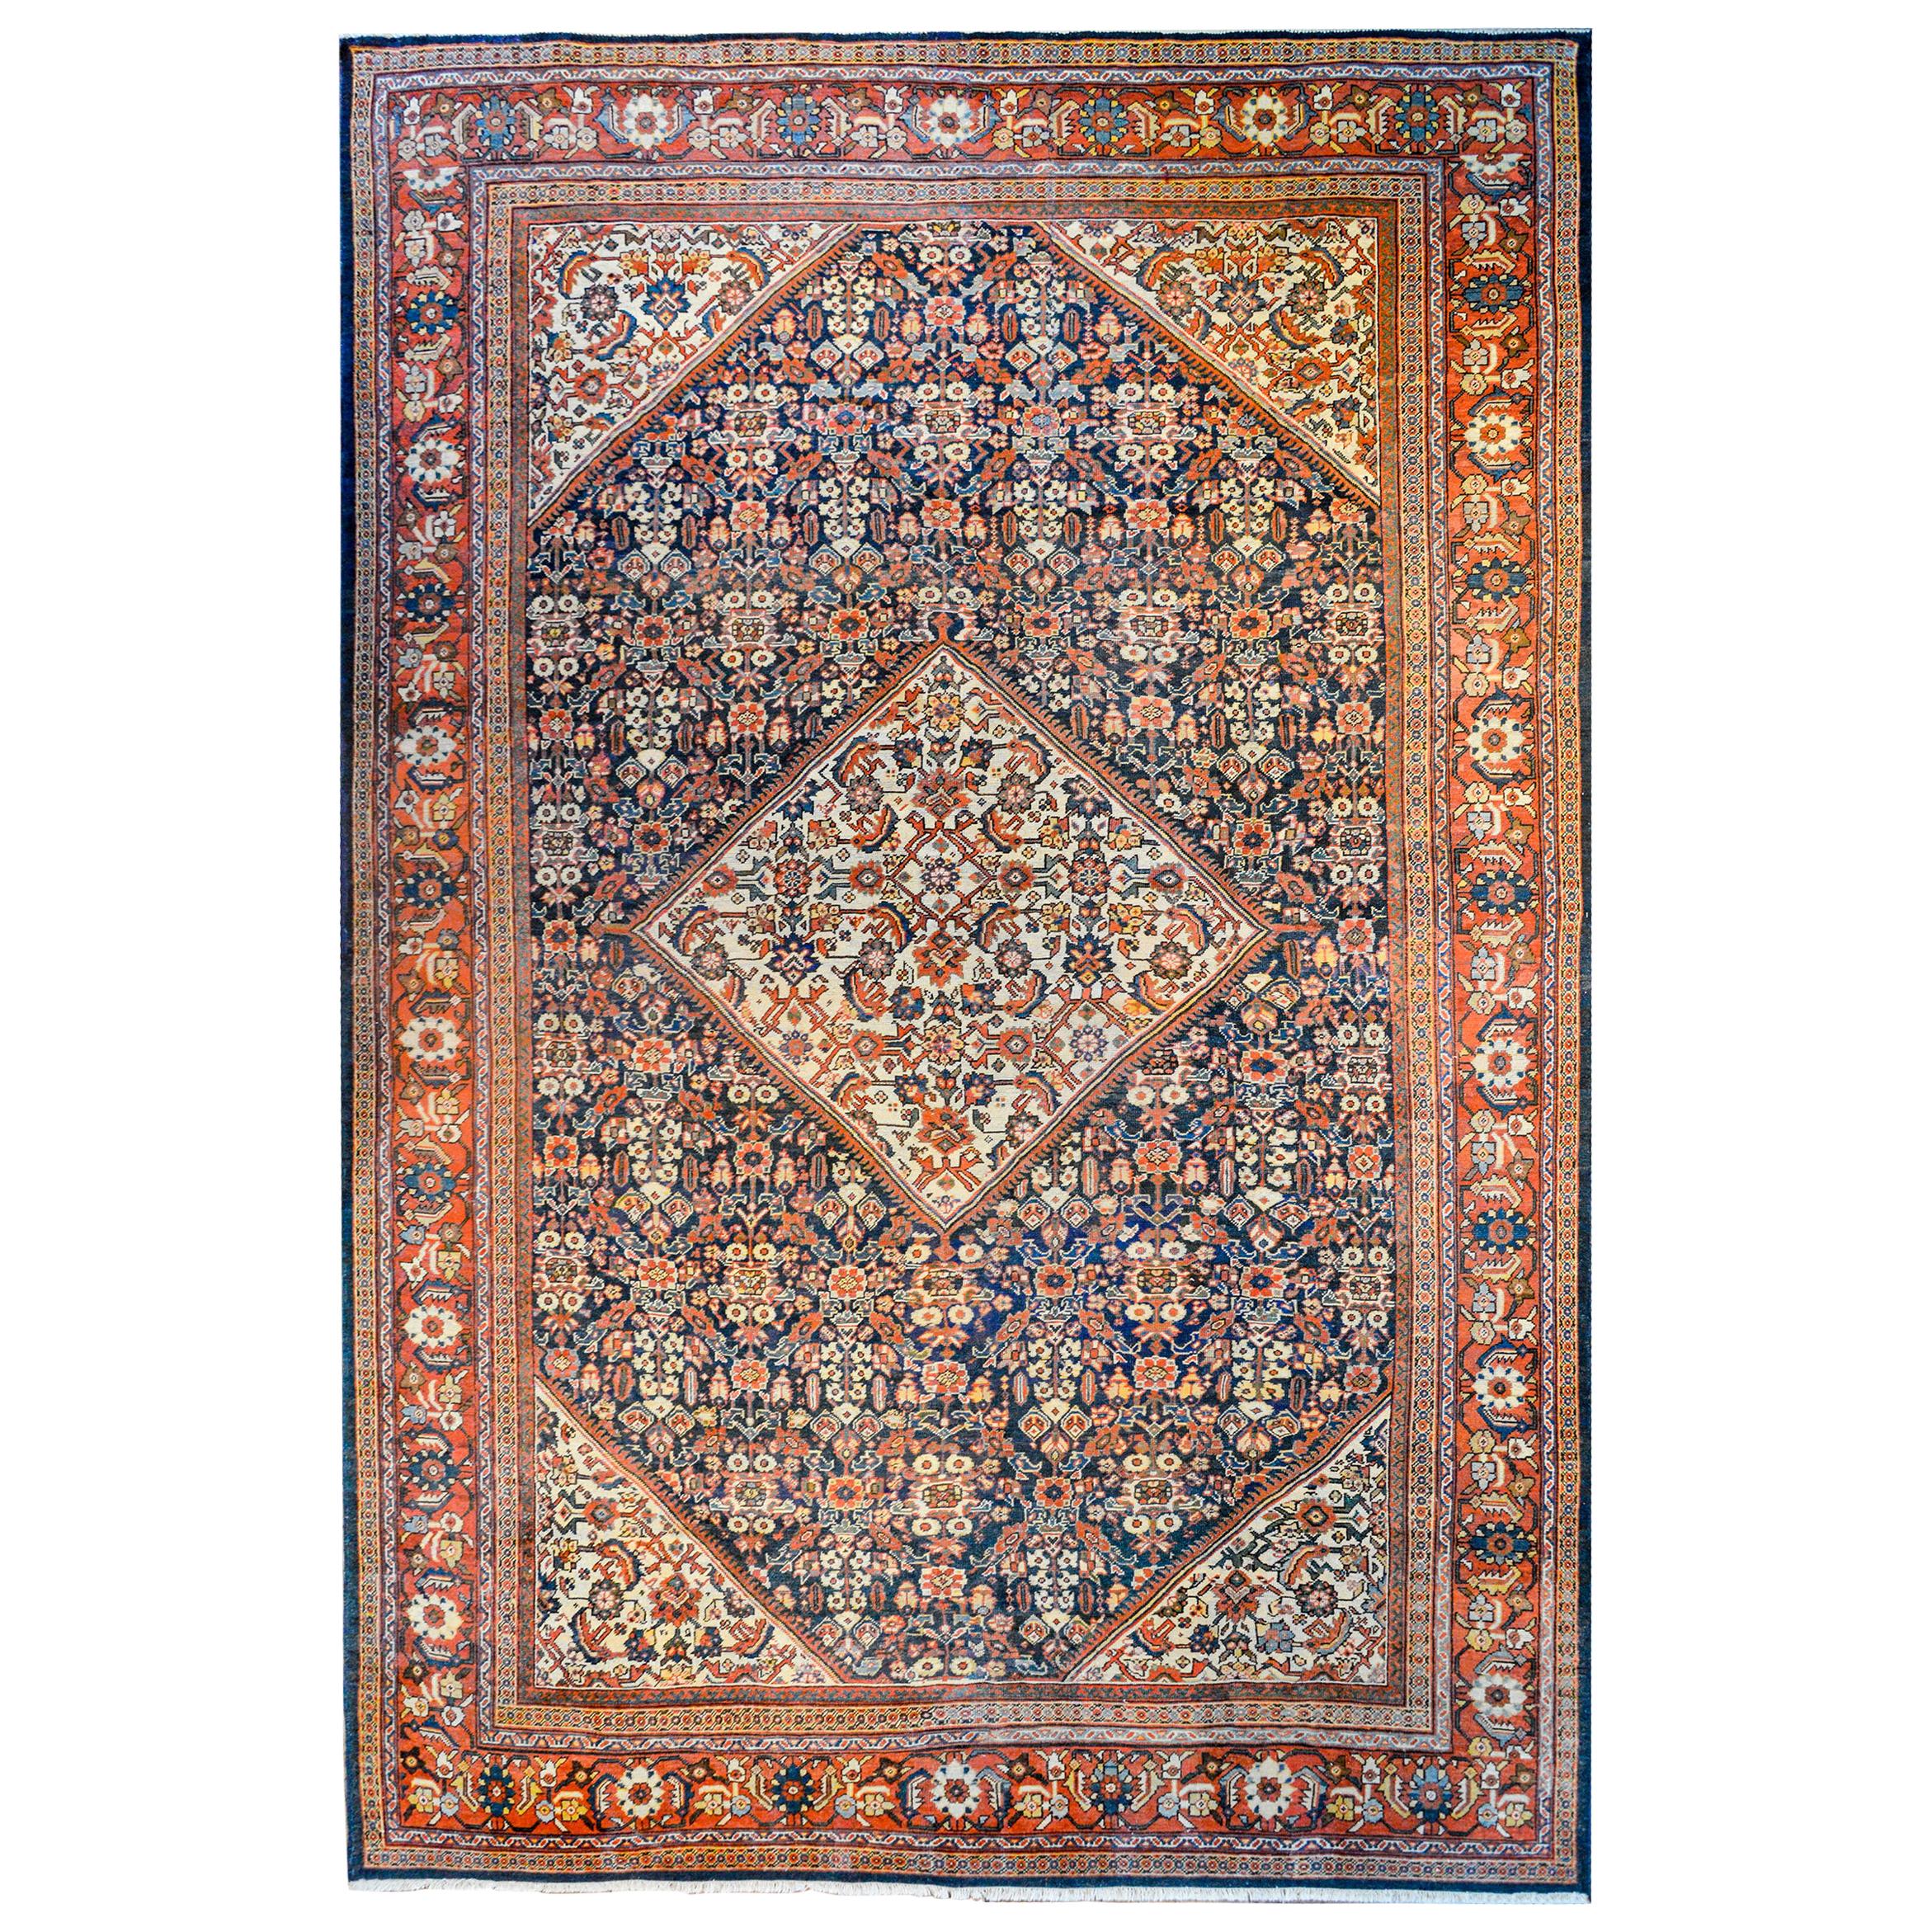 Outstanding Early 20th Century Sultanabad Rug